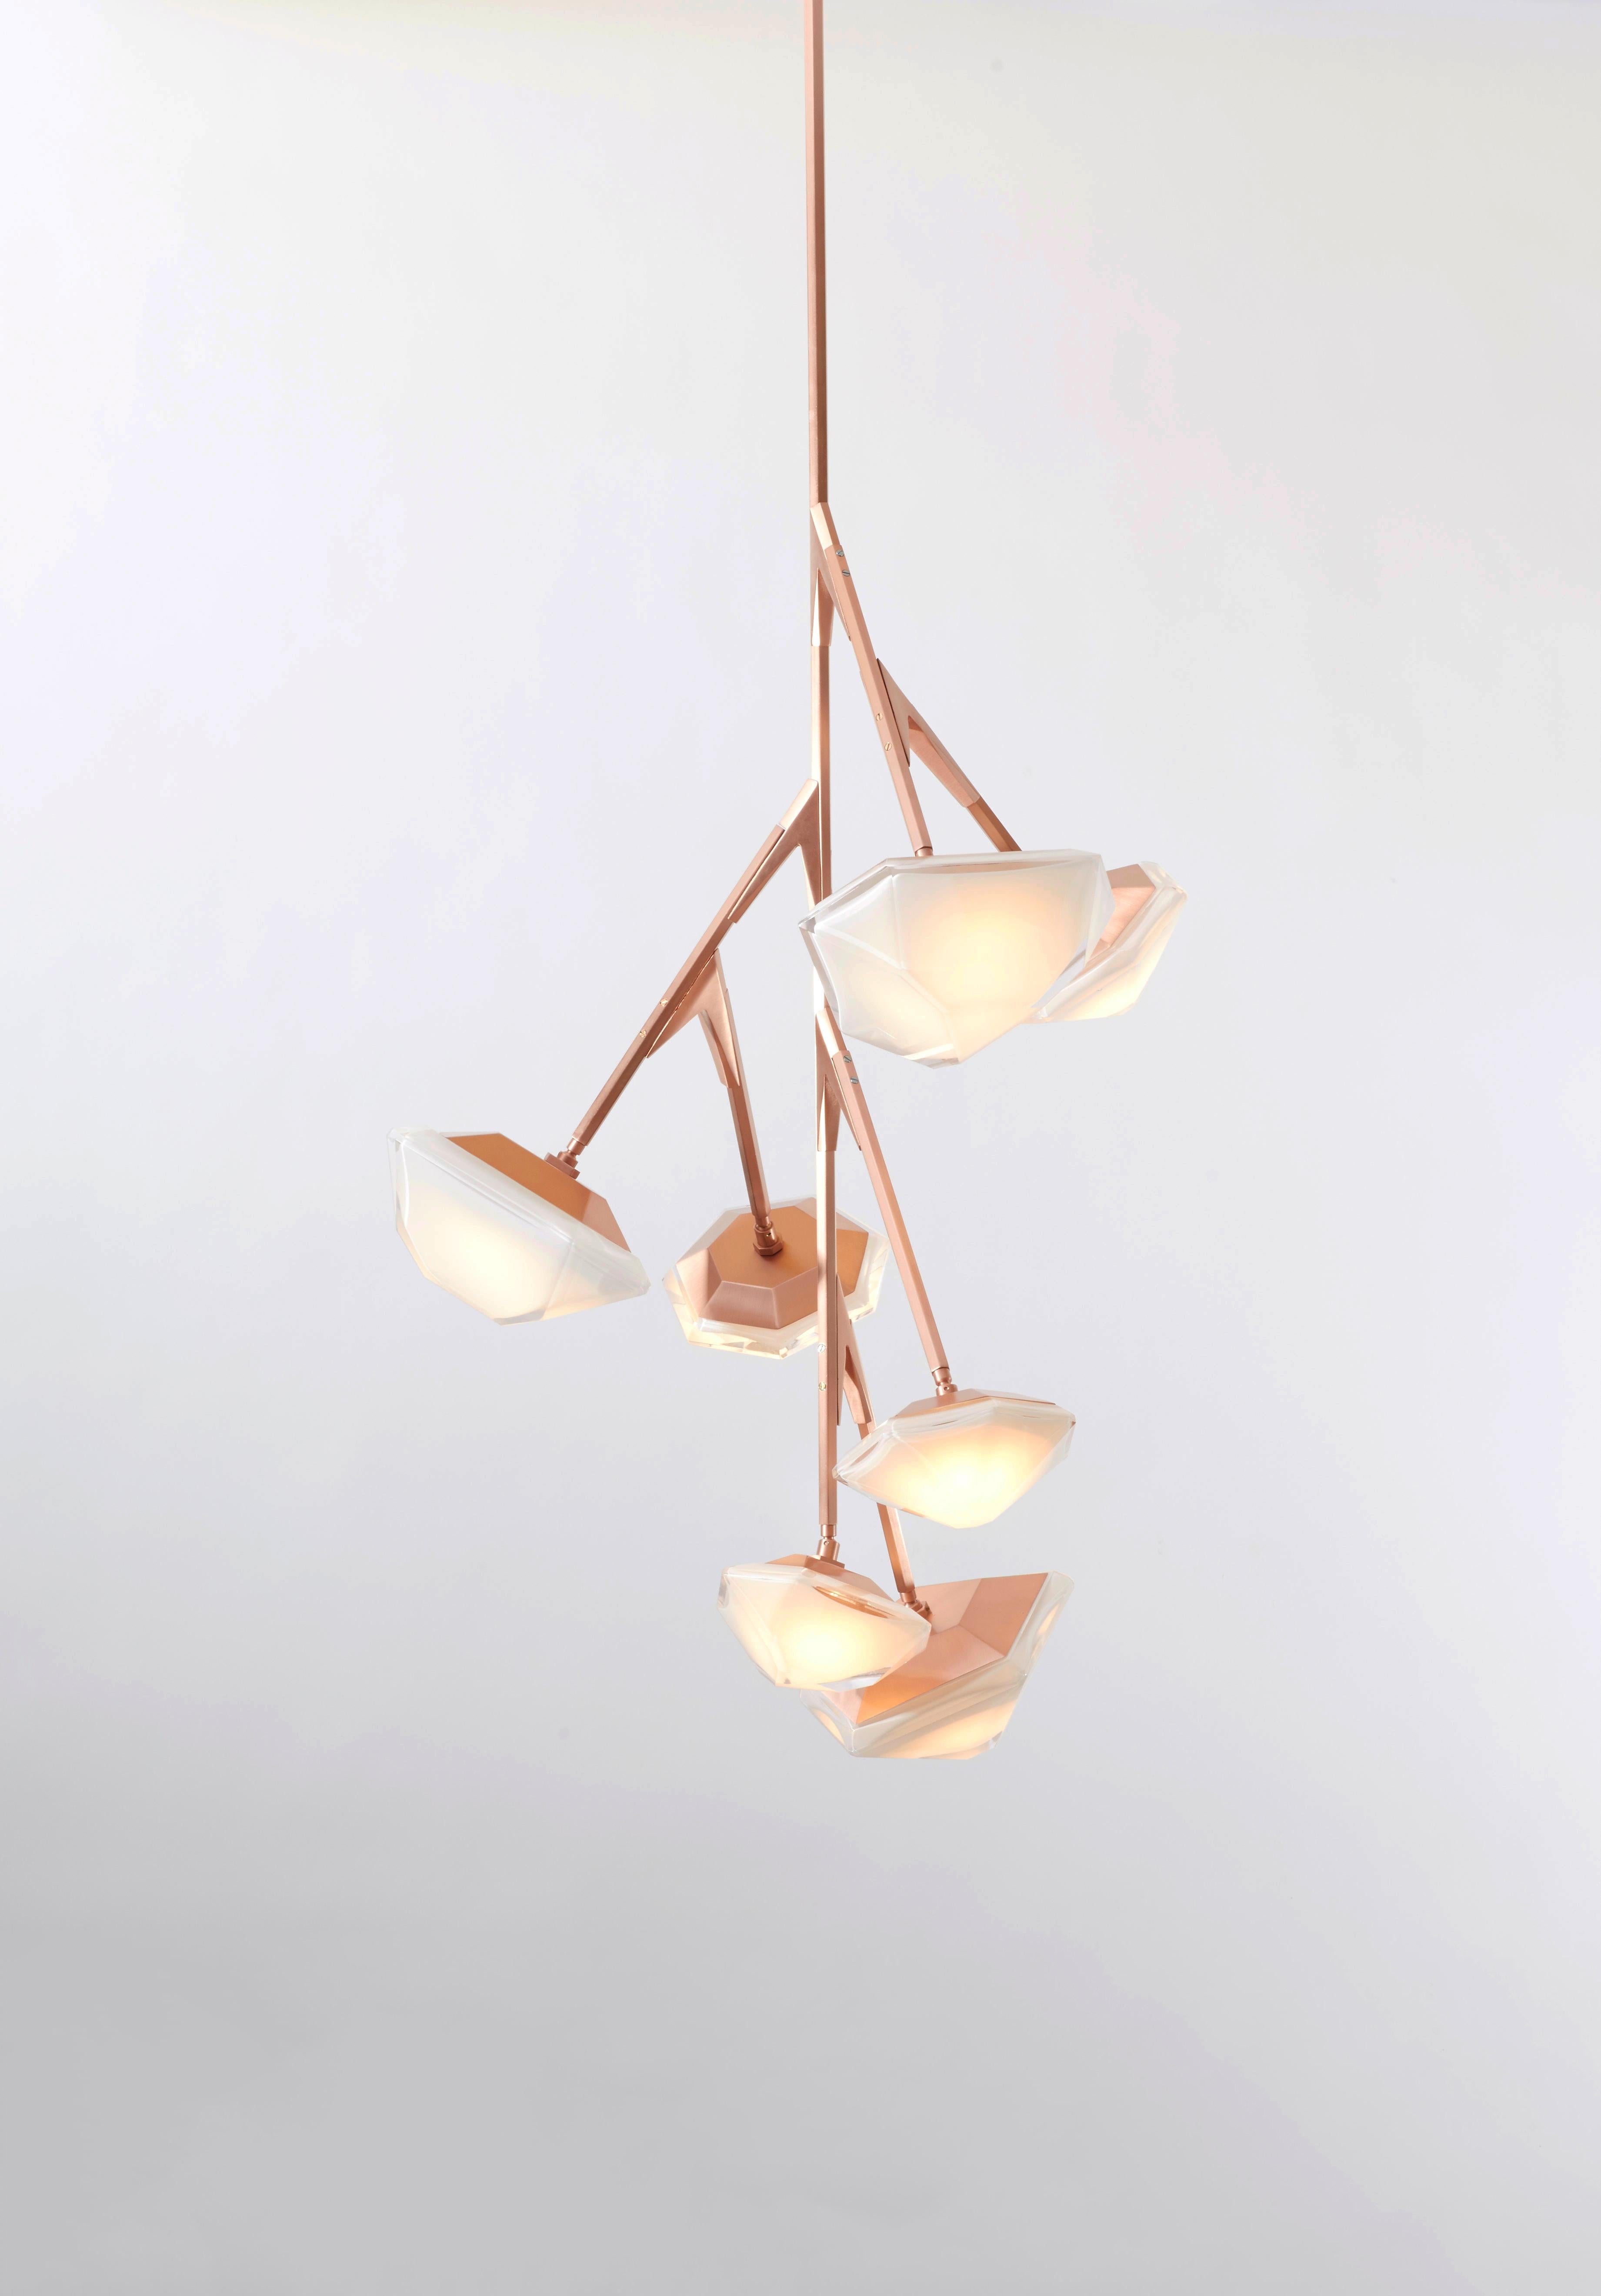 Myriad tall chandelier is inspired by nature’s bioluminescent organisms, made up of the brand’s signature double-blown glass and satin metallic hardware. Its articulated stems carry the soft-lit pivoting heads to create a delicate, asymmetric and